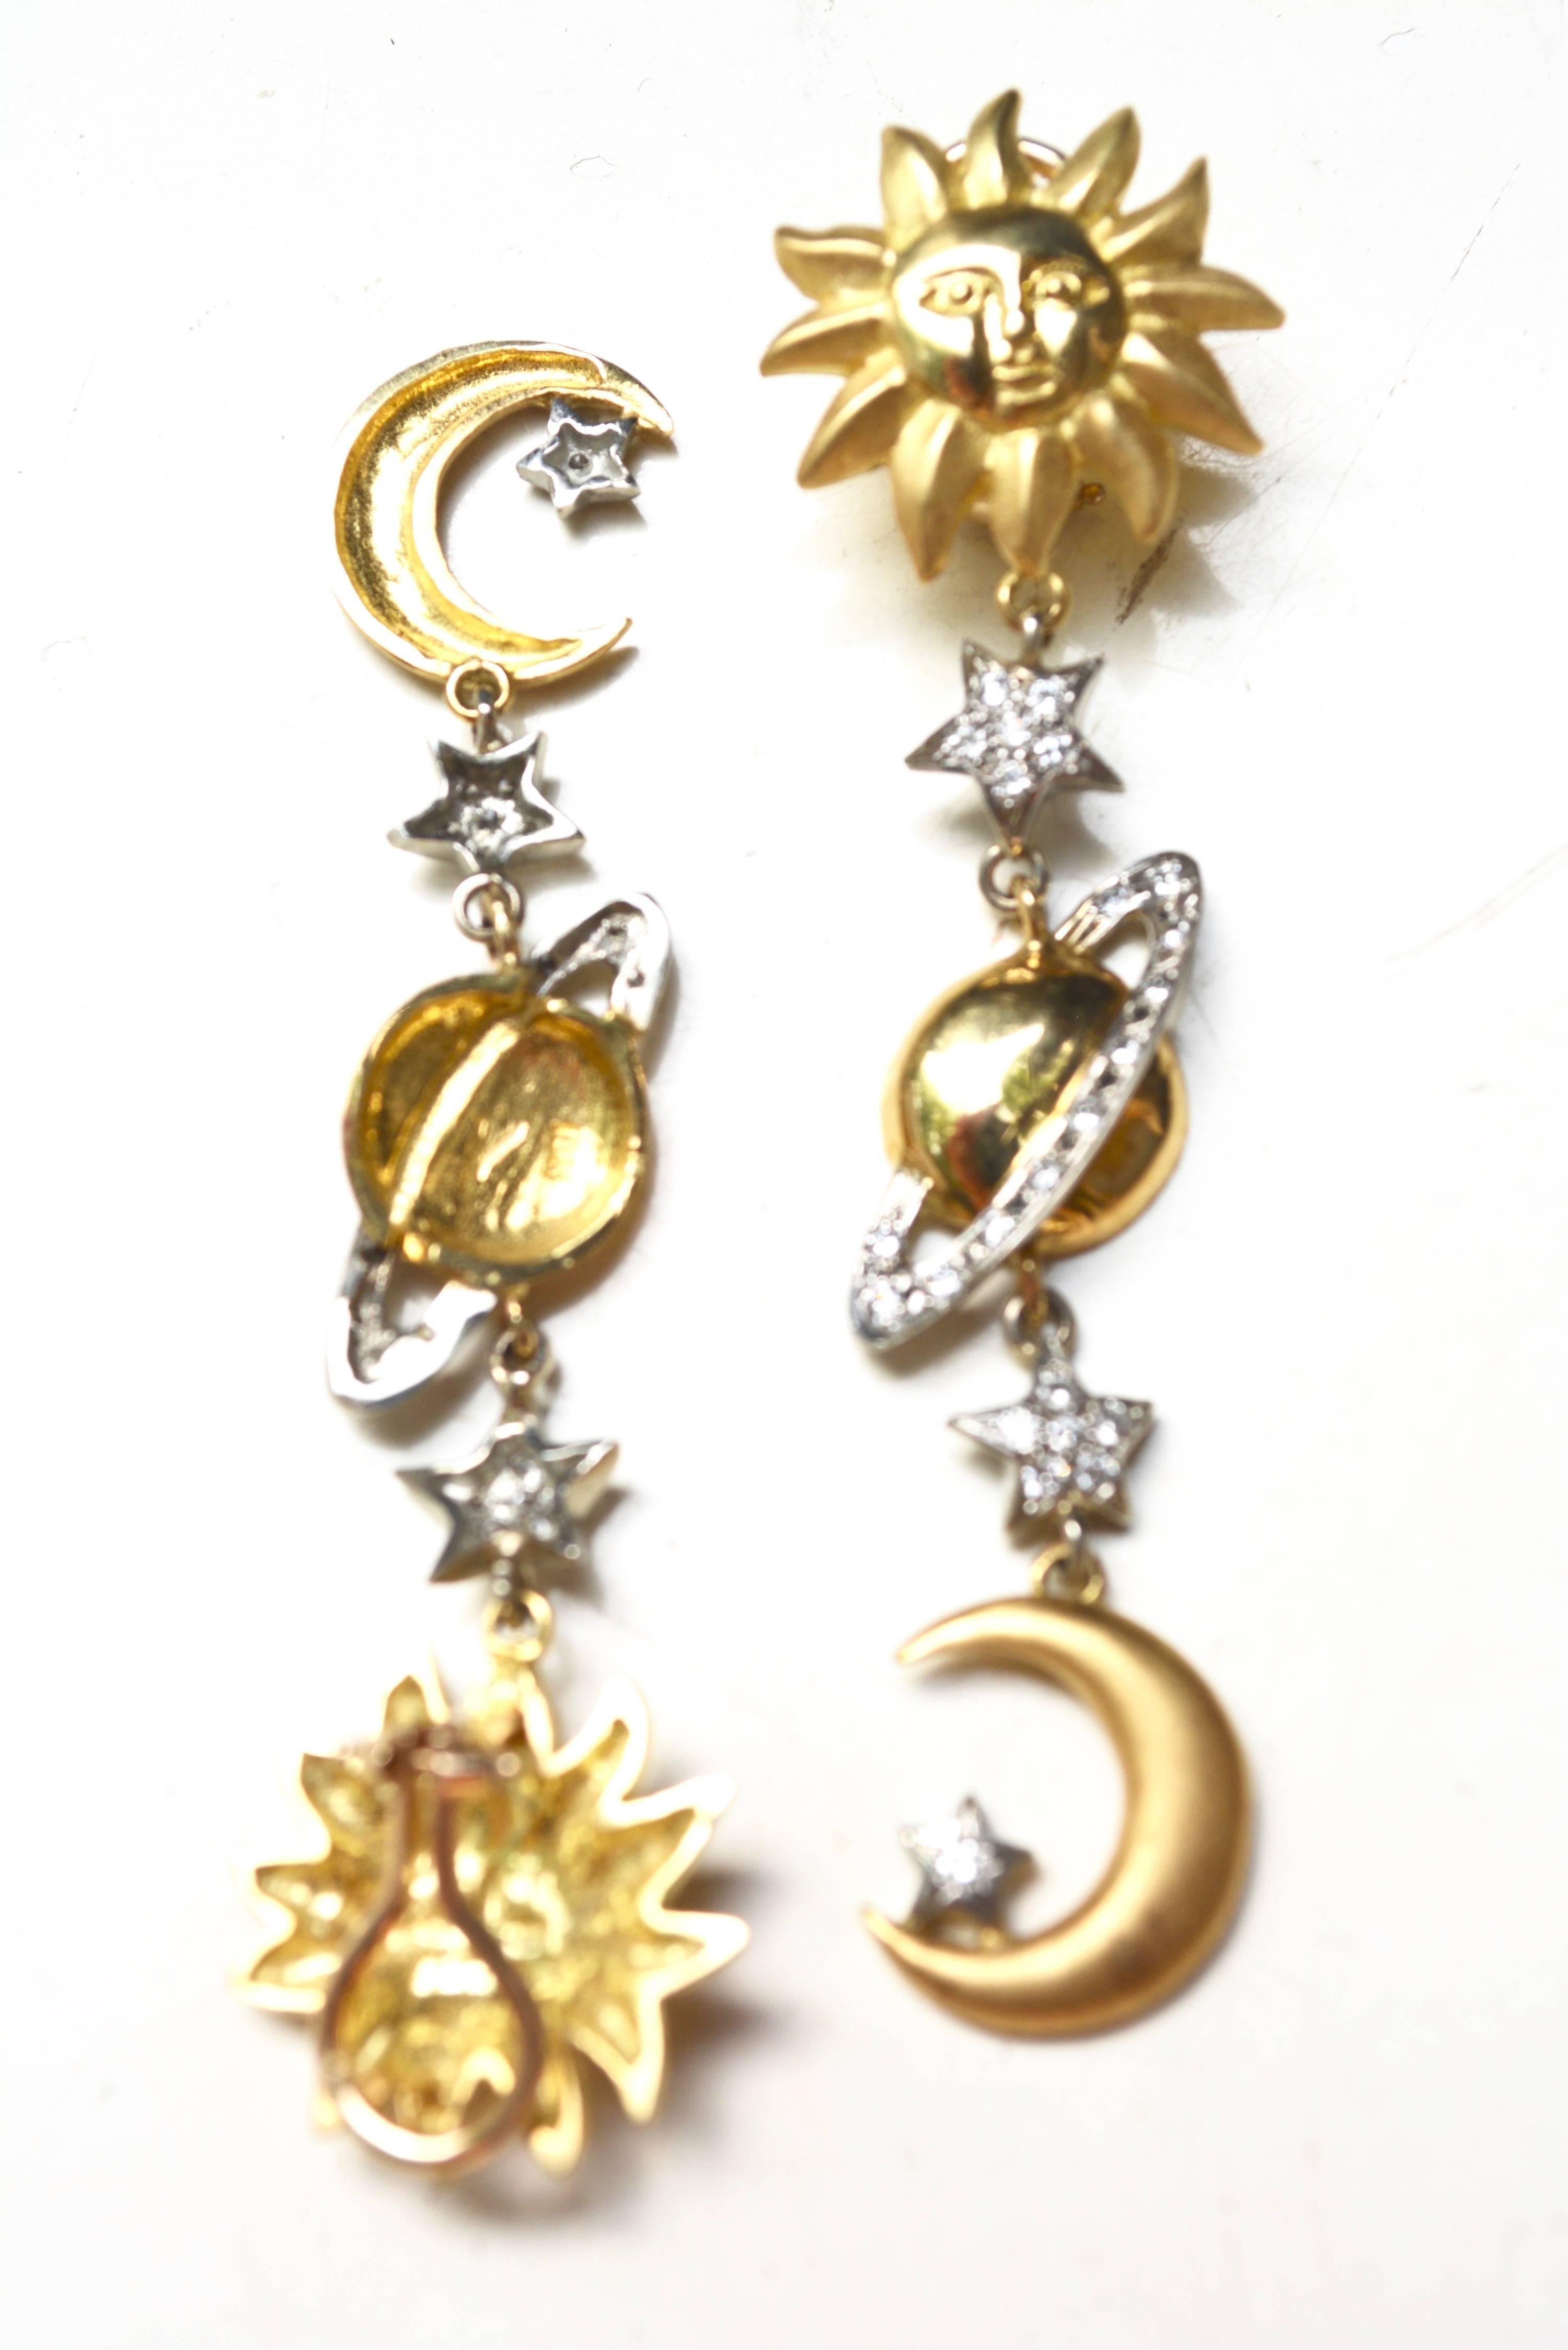 Circa 1980s marked 18k gold sun and moon (solar system) earrings. Unique and fun design. Platinum details. About 18 grams. Not overly heavy on the ear. 3" long.